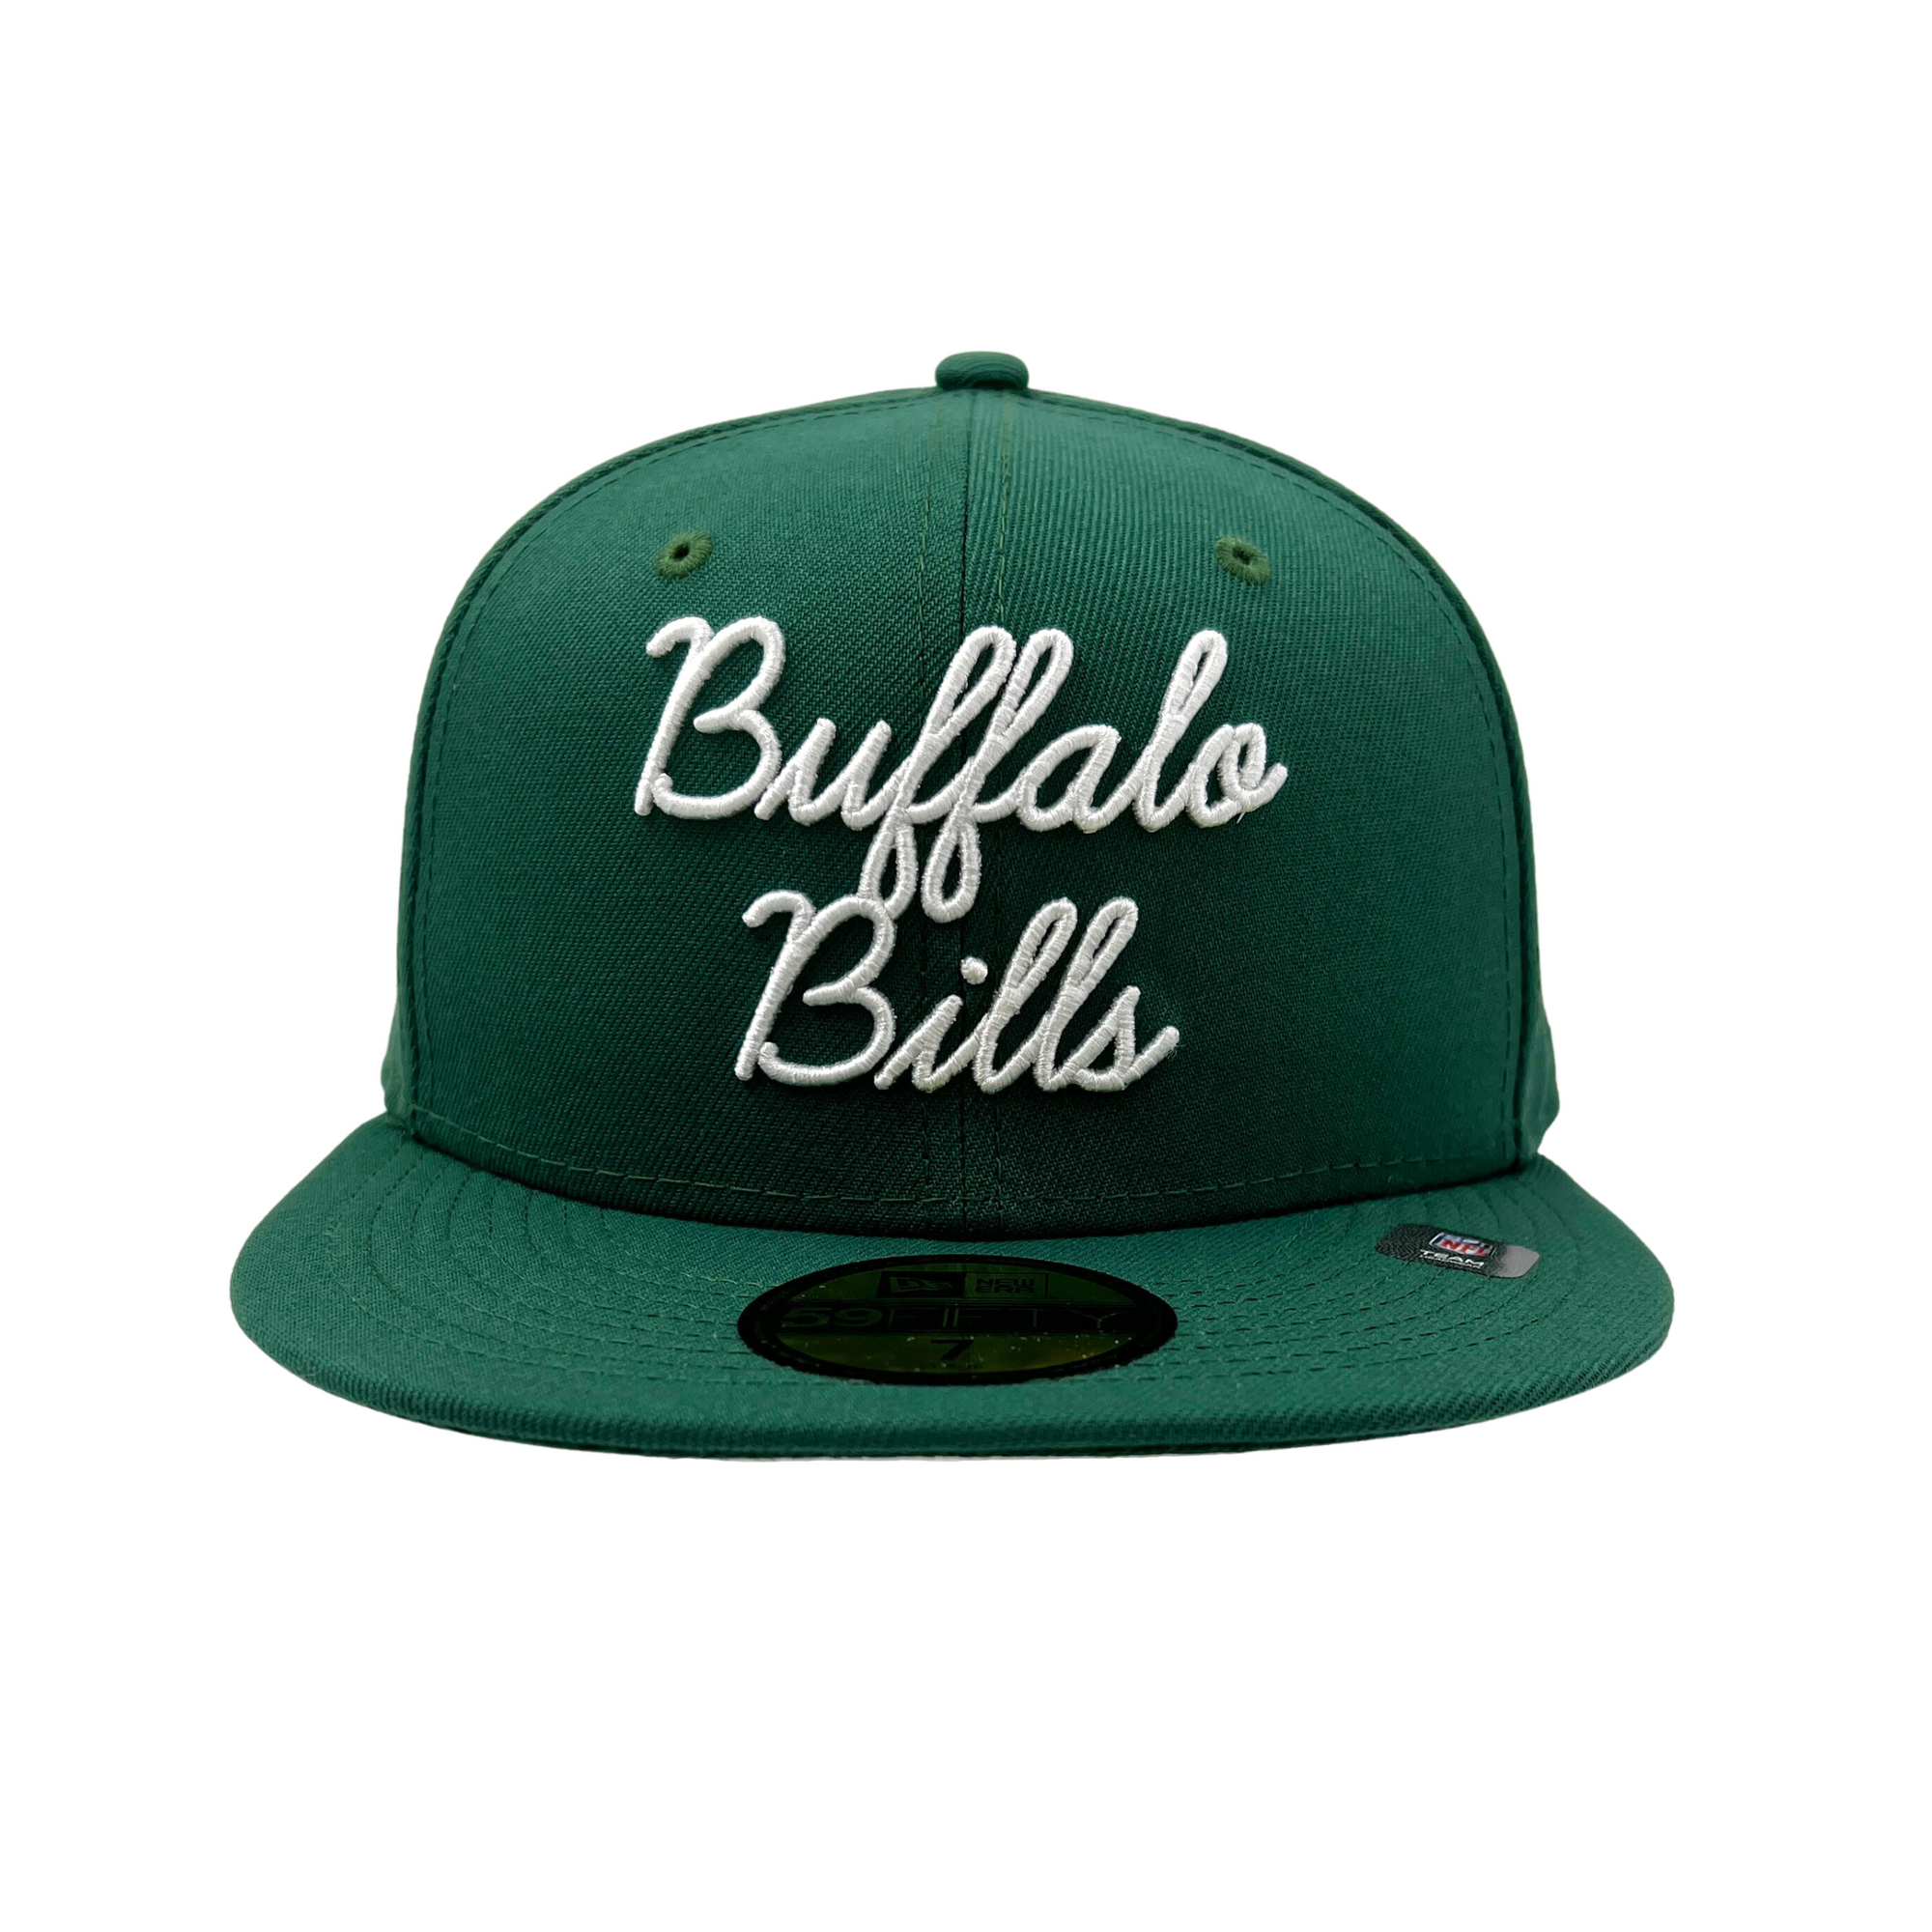 59Fifty New Era Buffalo Bills Embroidered Green Fitted Hat